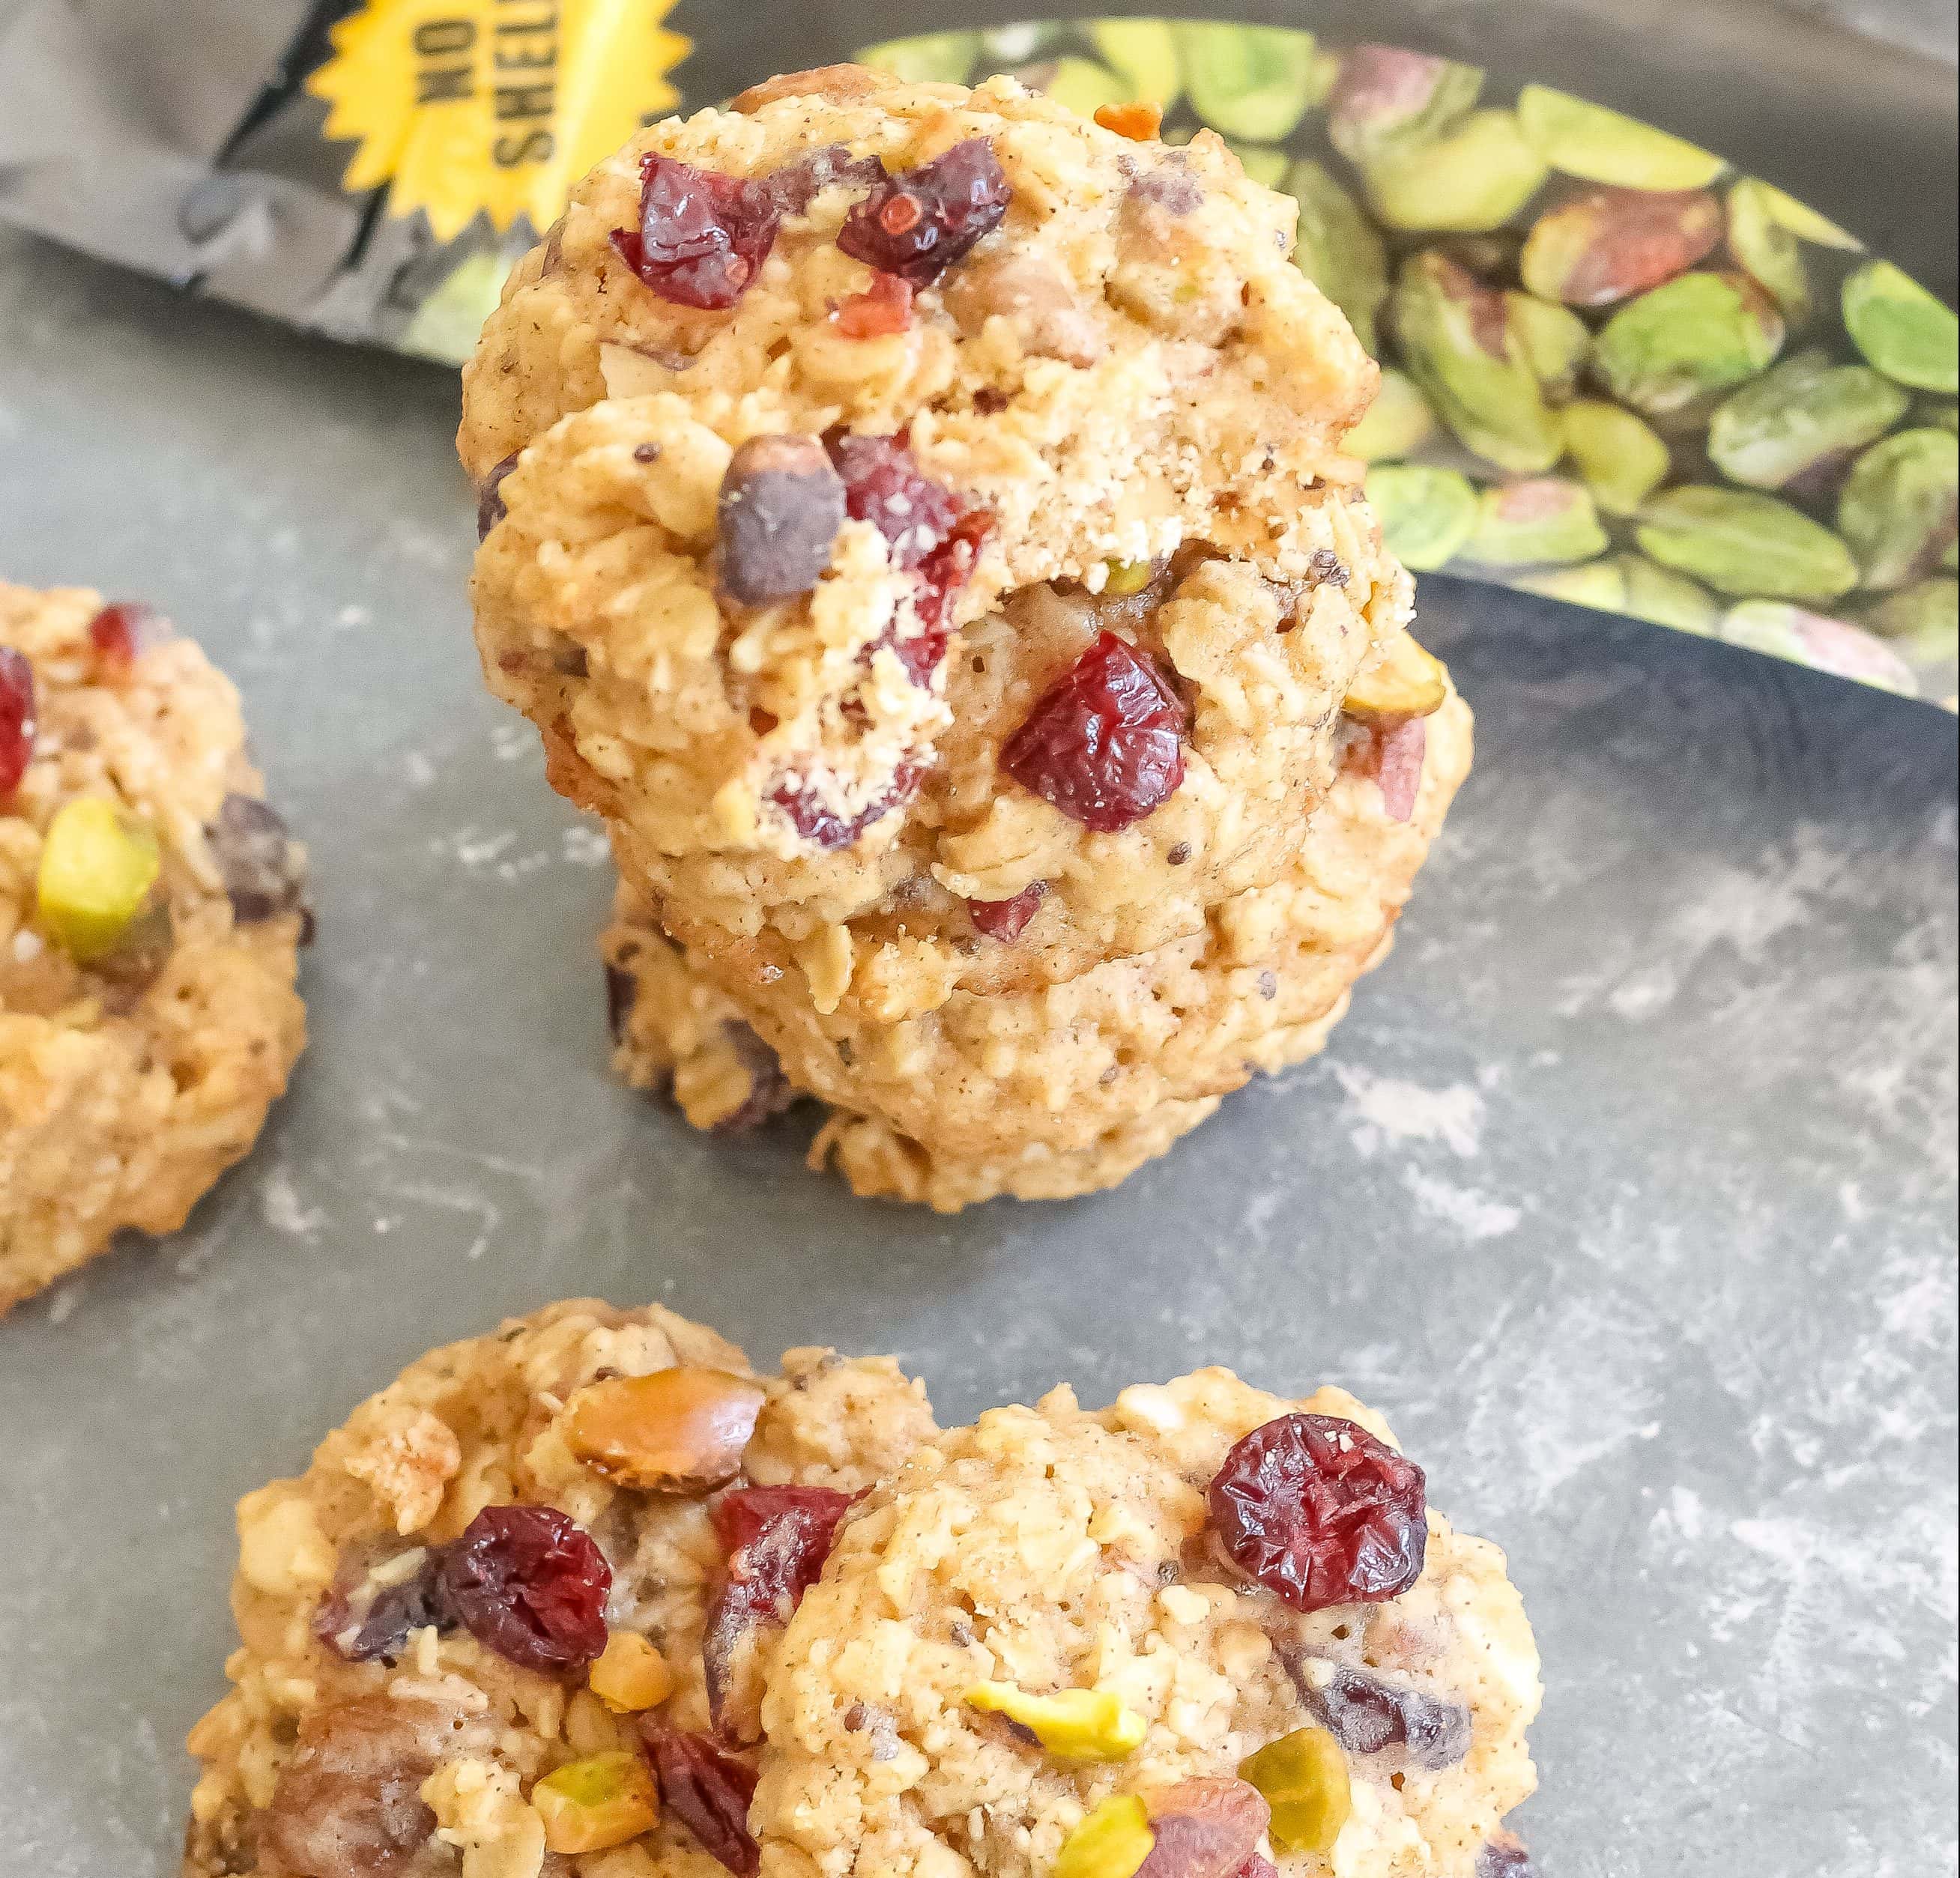 Healthy Oatmeal Cranberry Pistachio Cookies